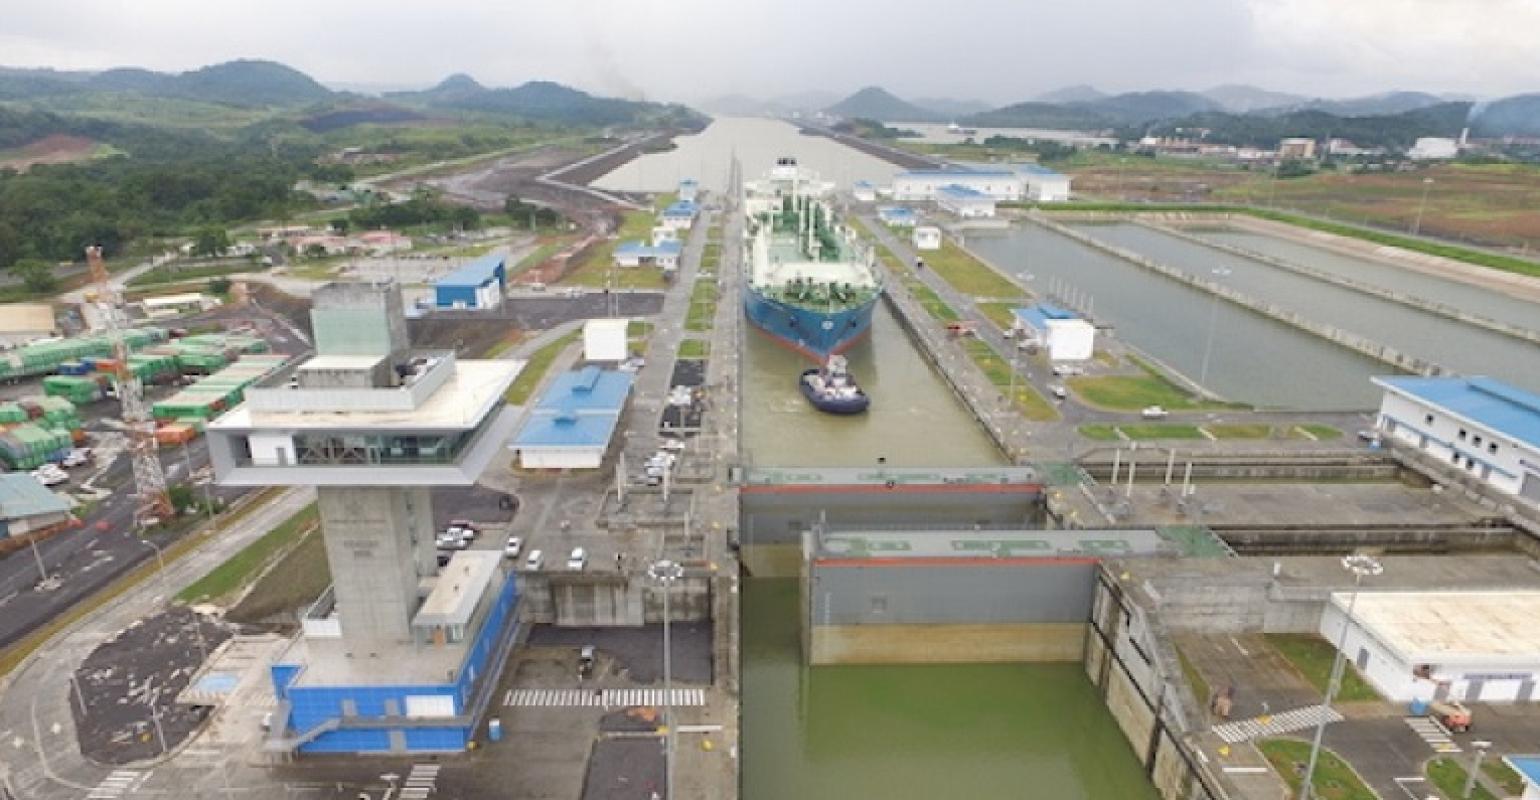 Panama Canal announces draught restrictions for neopanamaxes